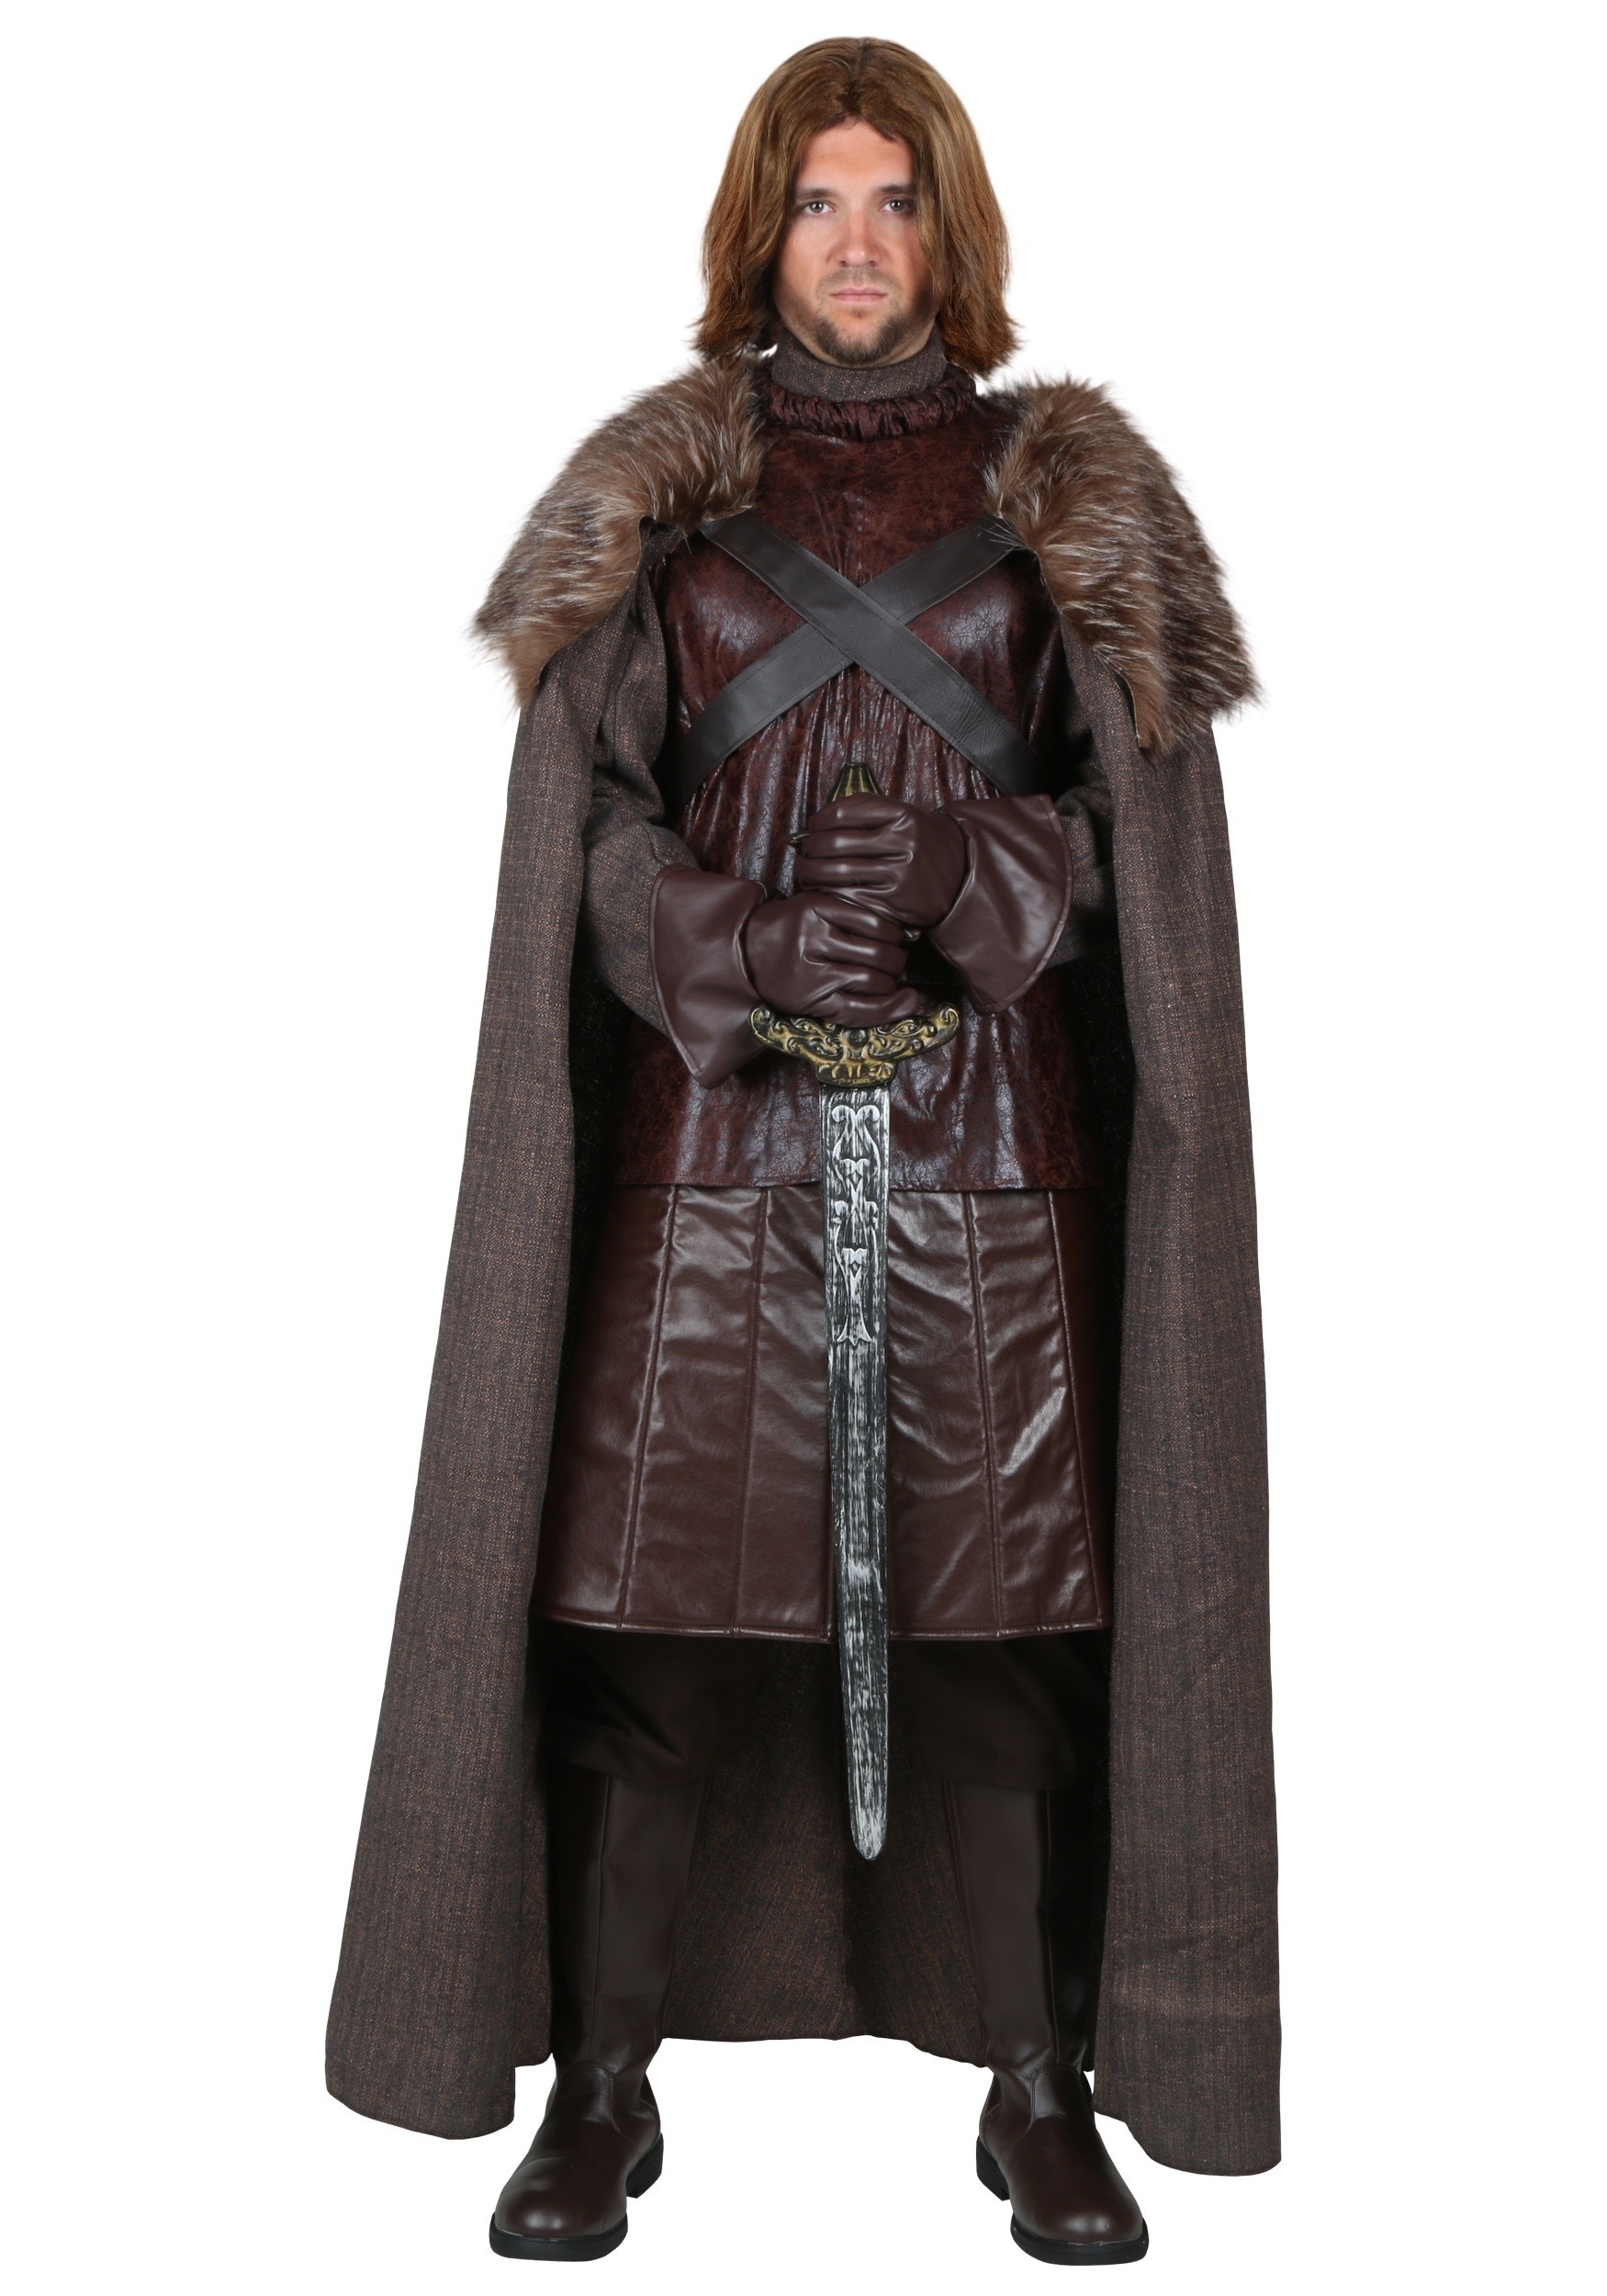 Northern King Plus Size Costume | GOT costume | Exclusive